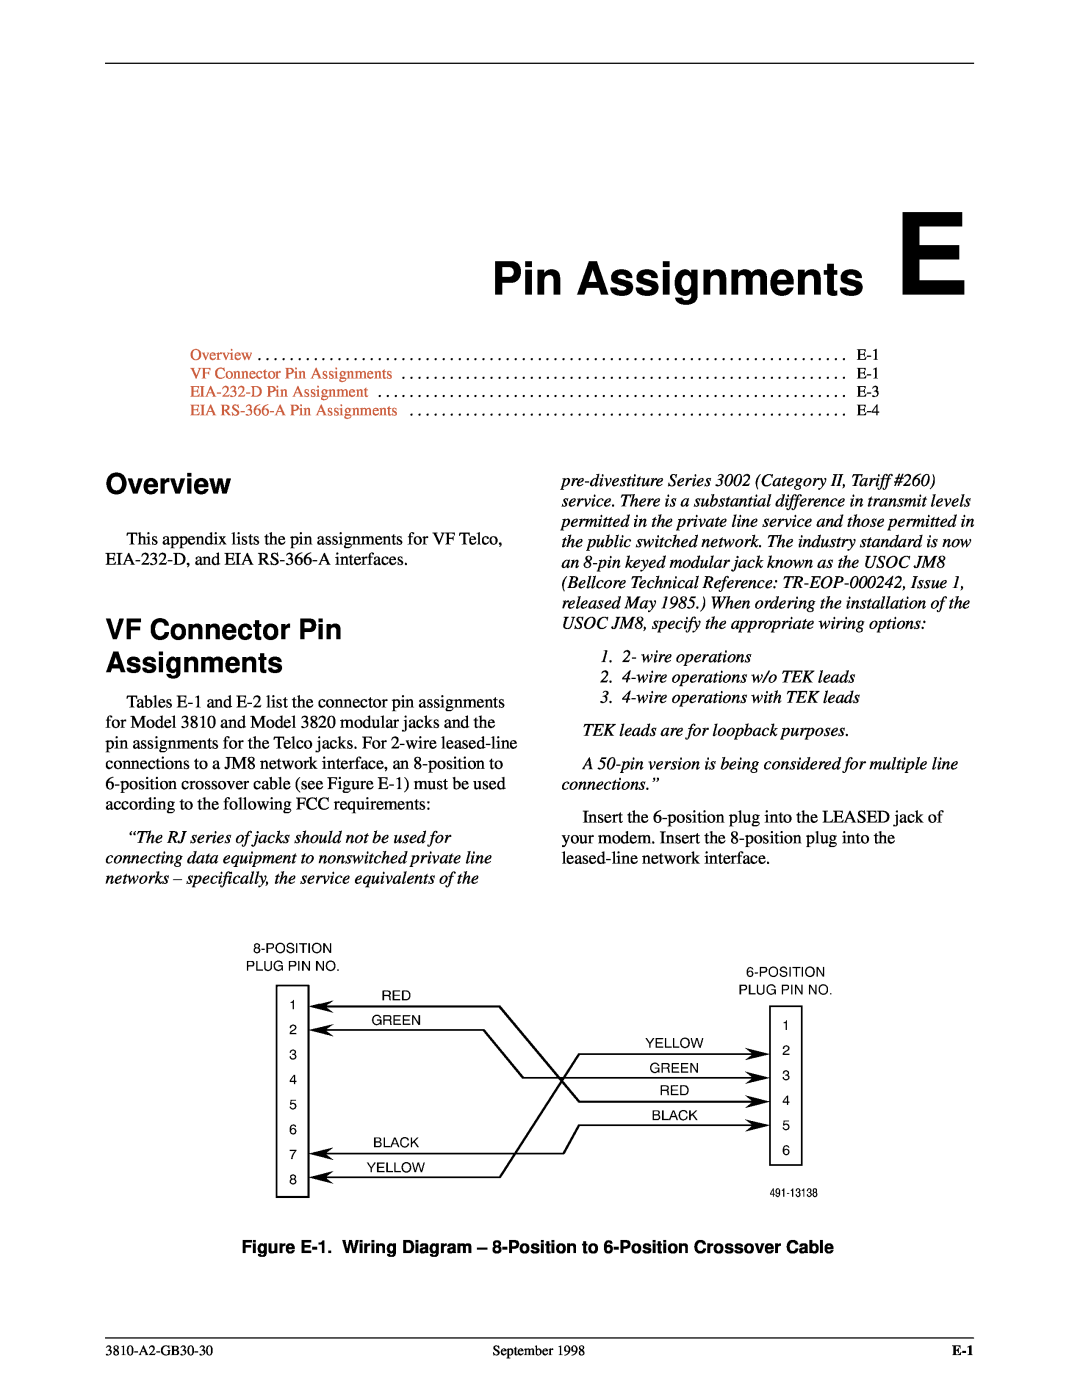 Paradyne 3800 Pin Assignments E, VF Connector Pin Assignments, 1. 2- wire operations 2. 4-wire operations w/o TEK leads 